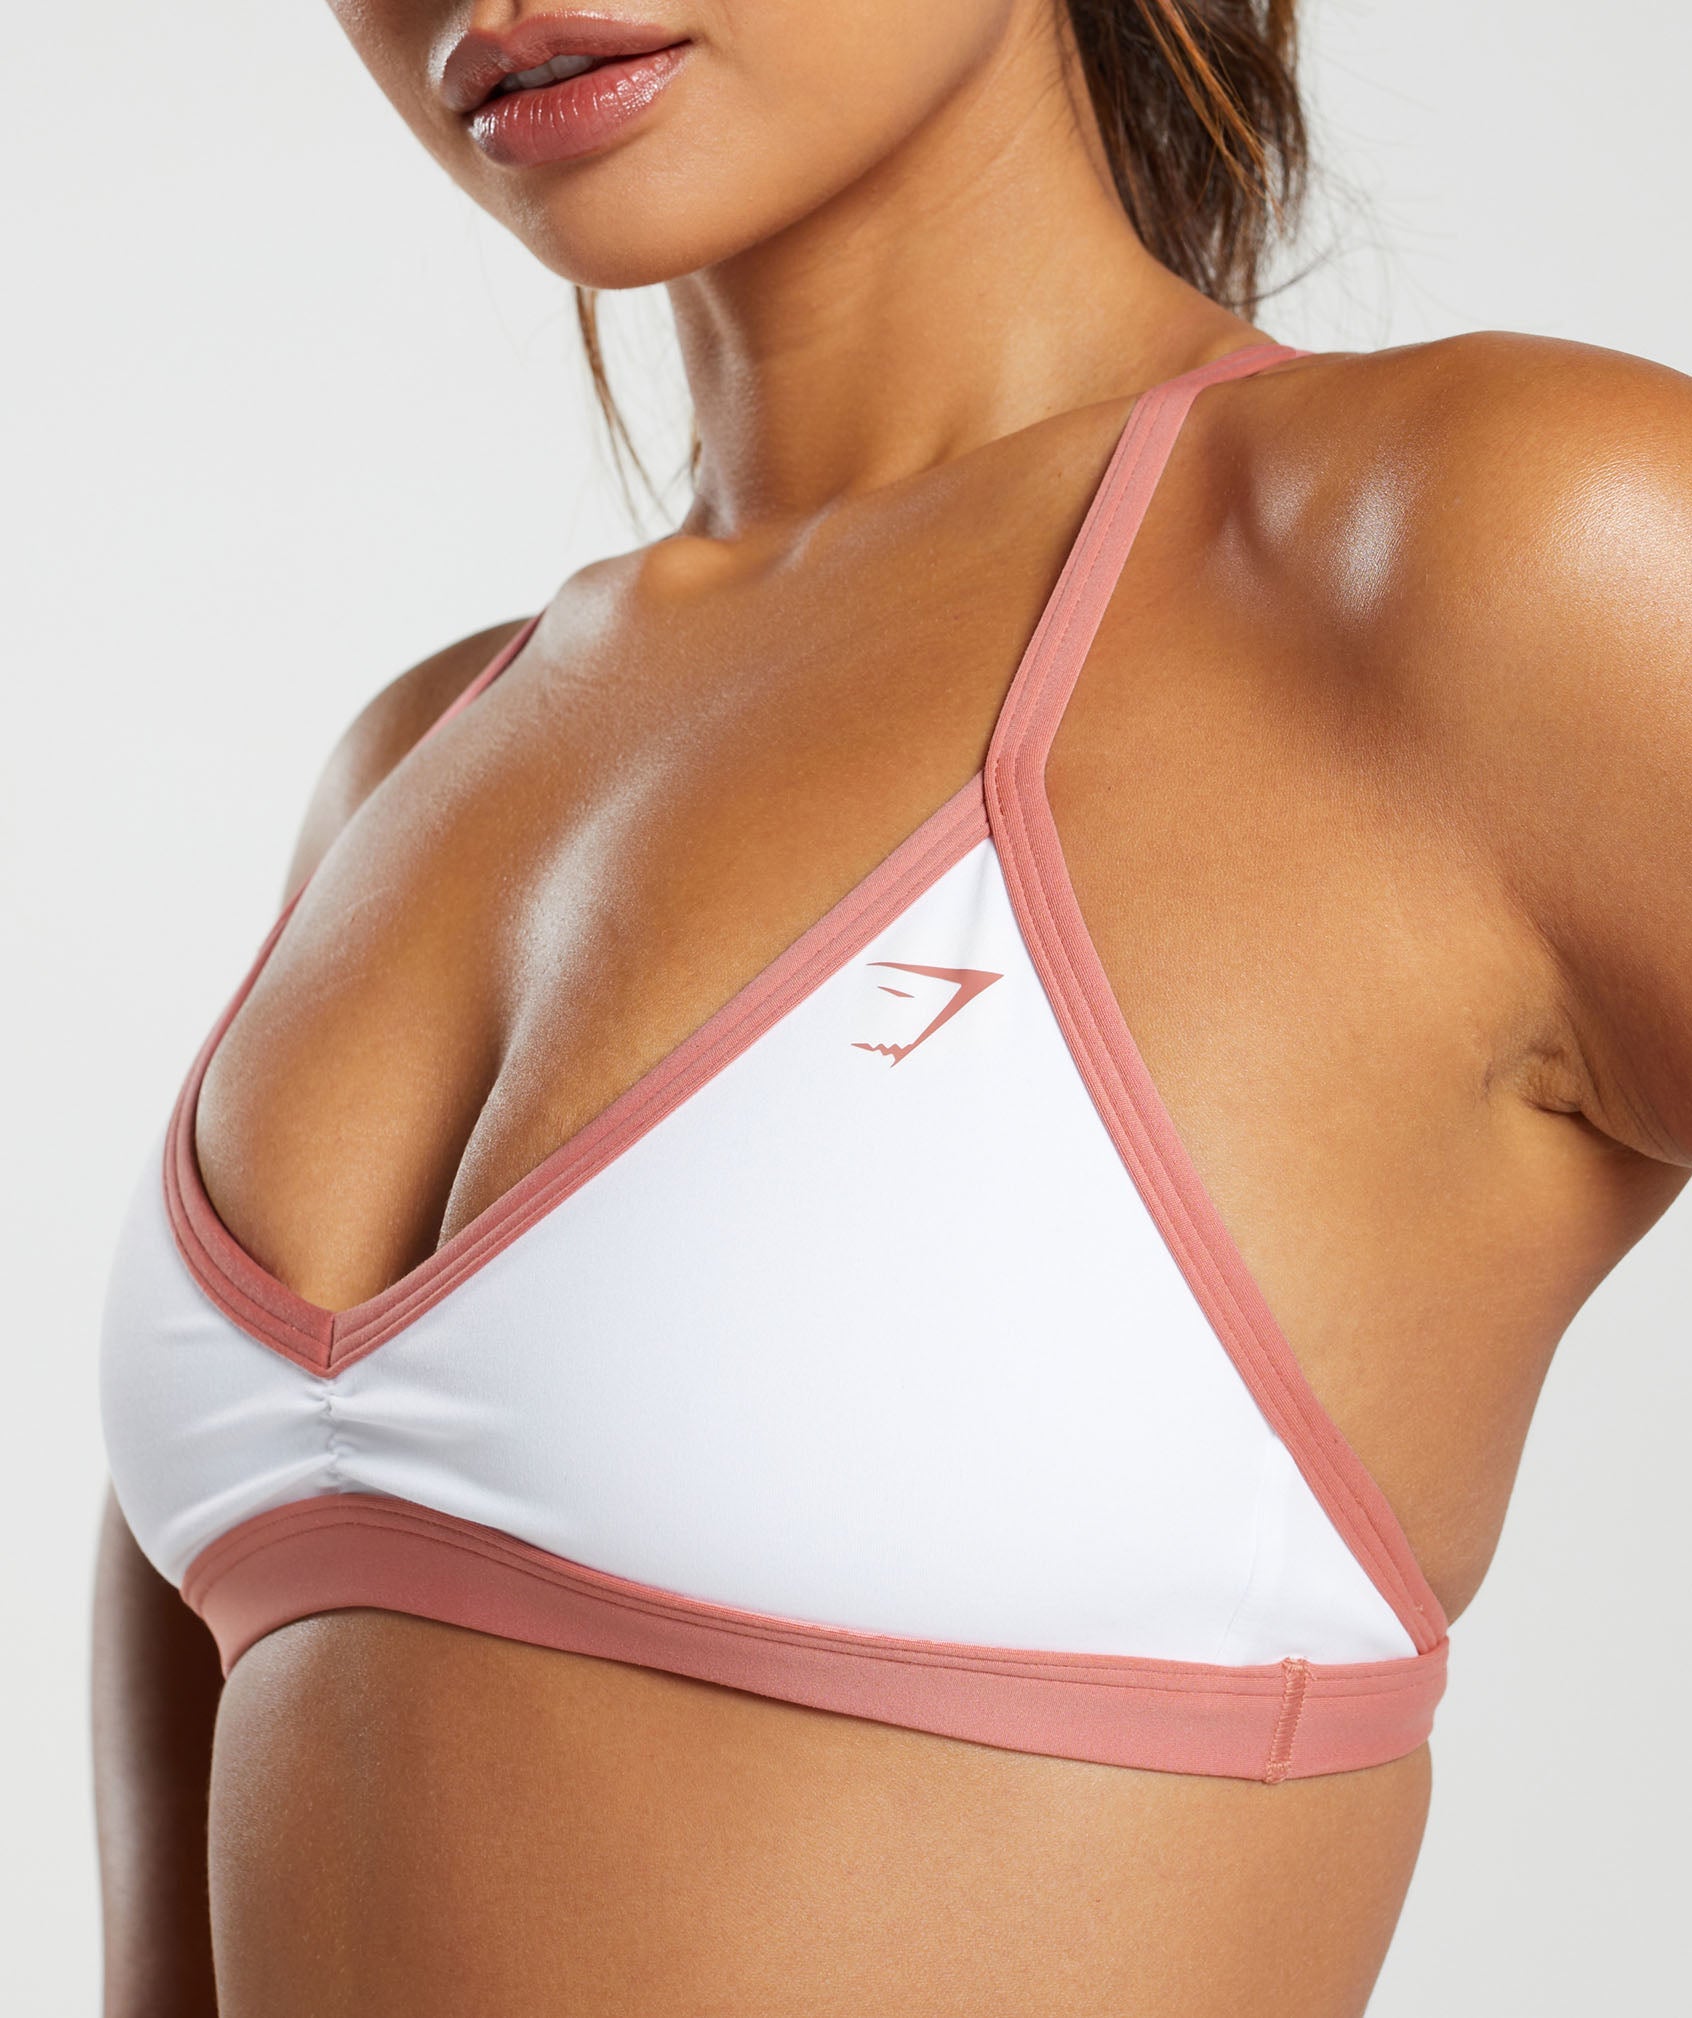 Minimal Sports Bra in White/Classic Pink - view 5